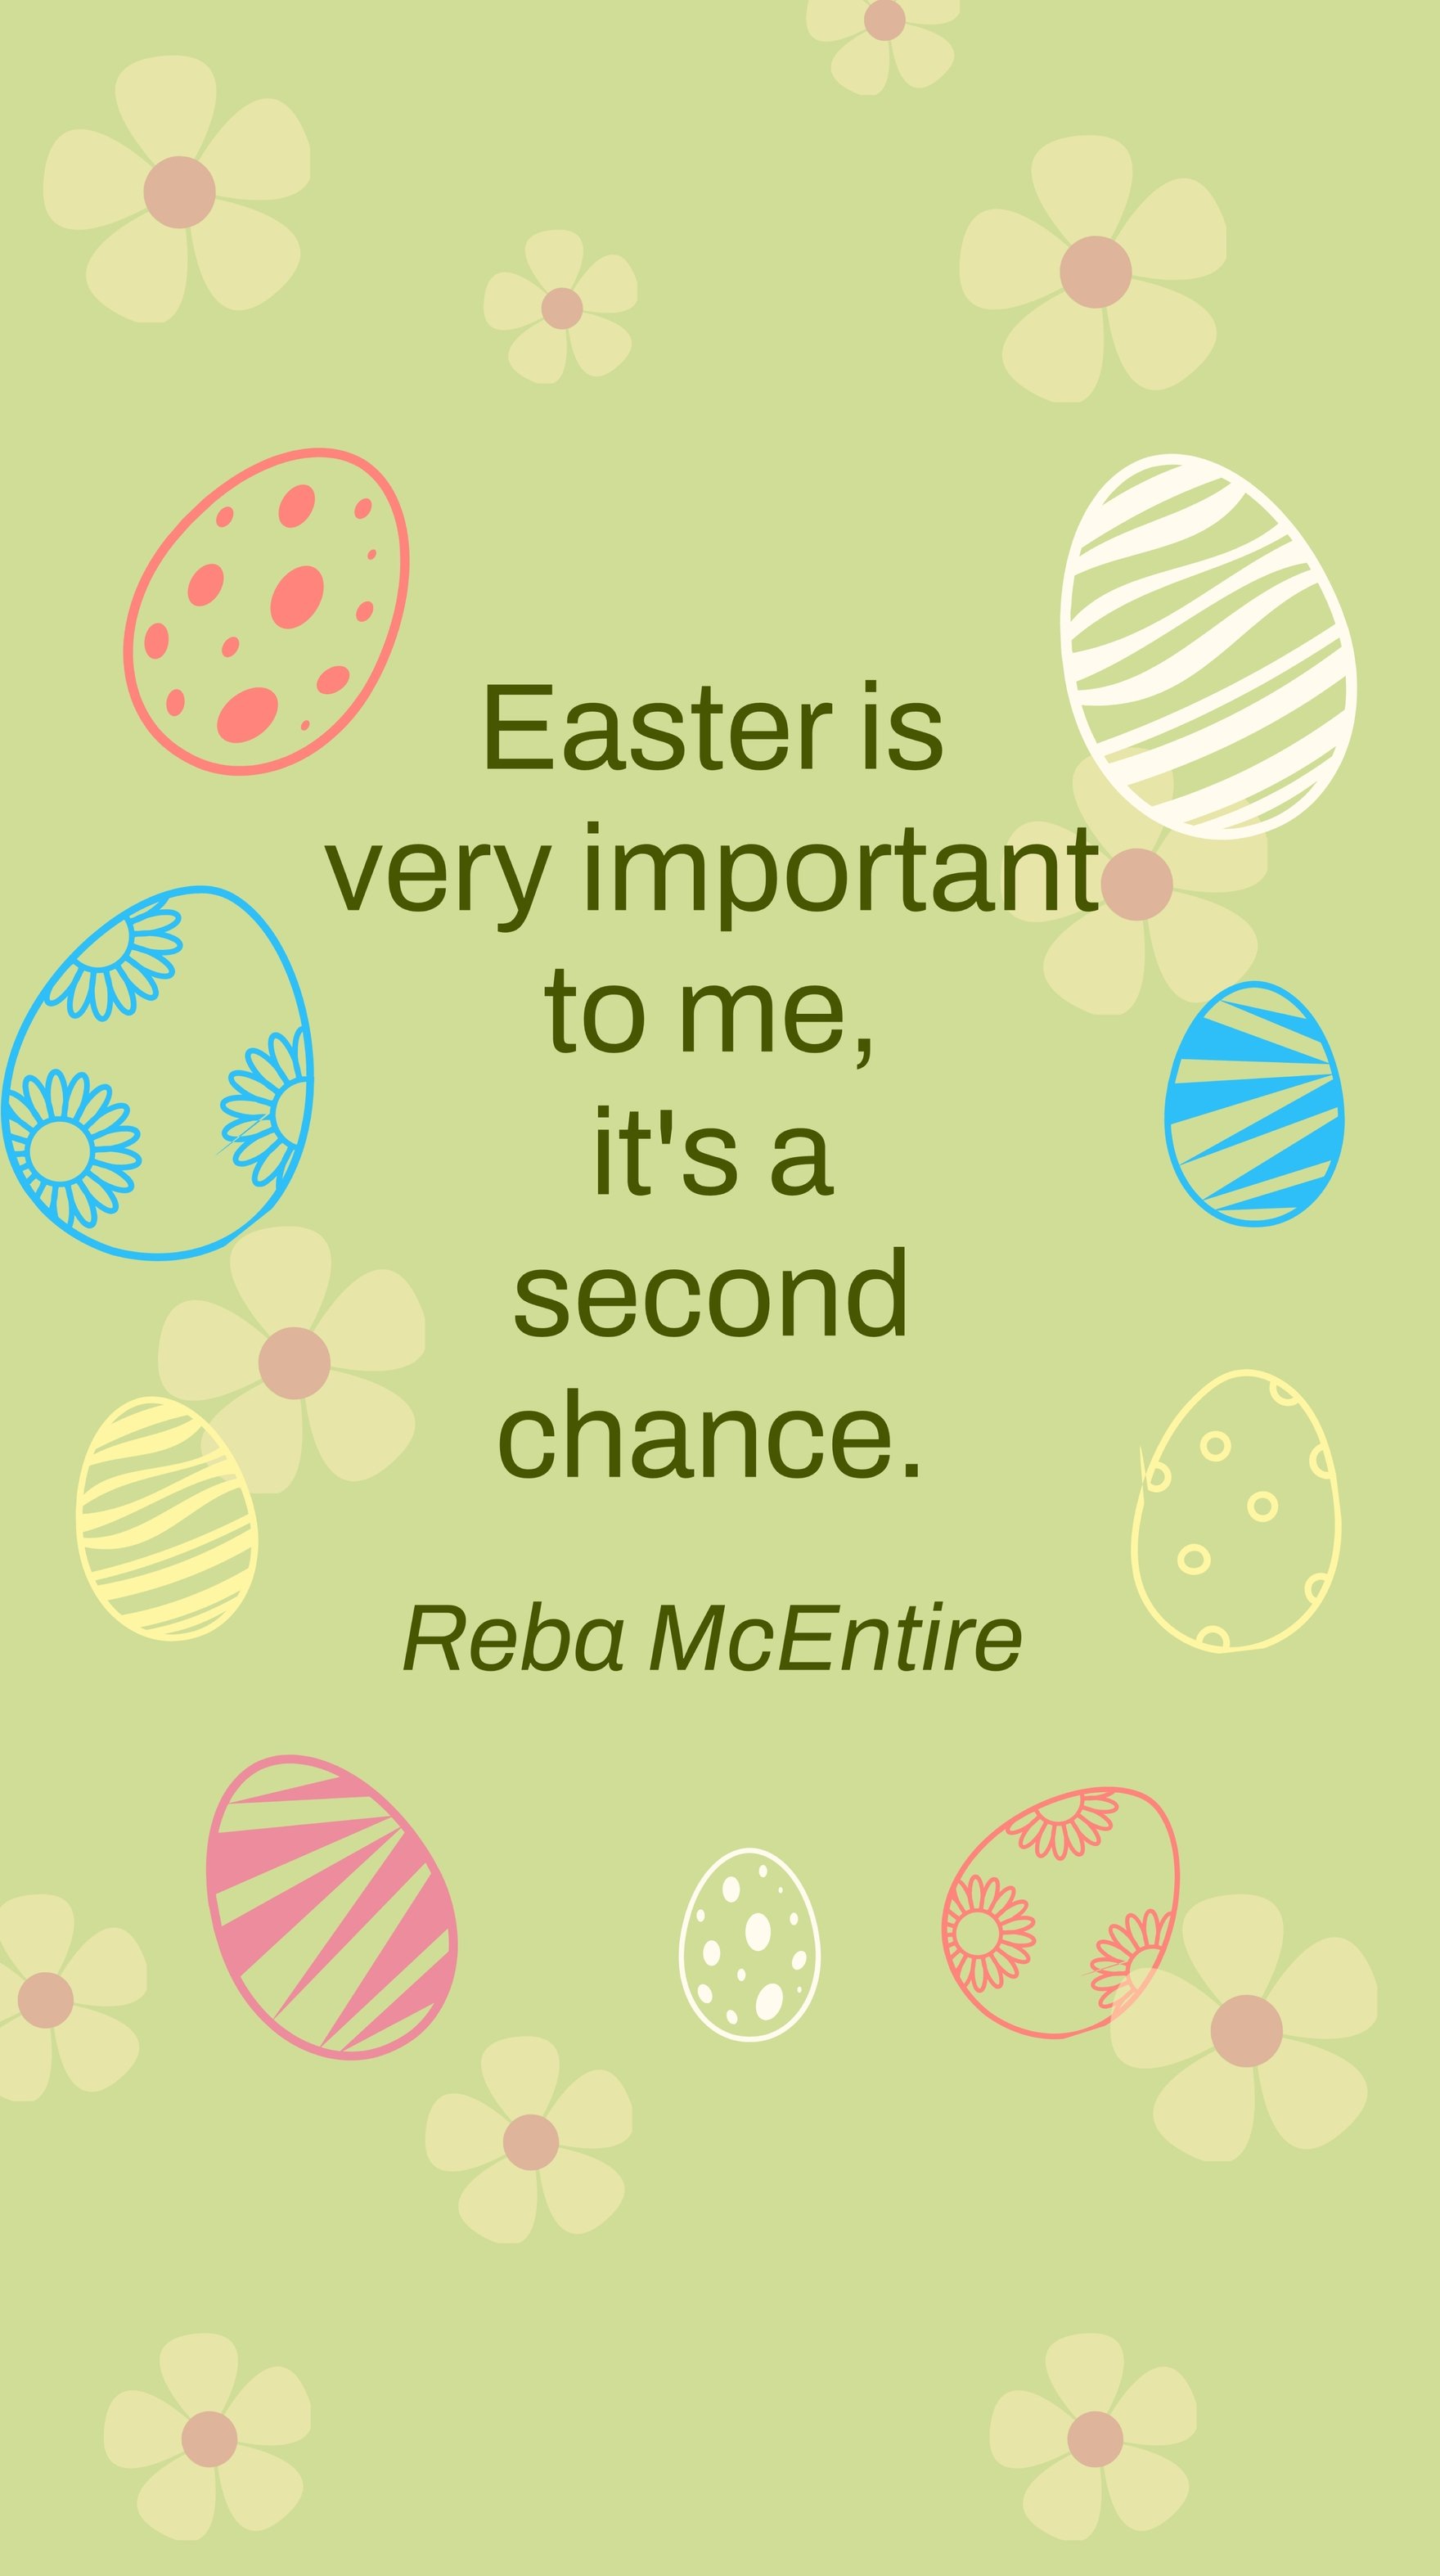 Free Reba McEntire - Easter is very important to me, it's a second chance.